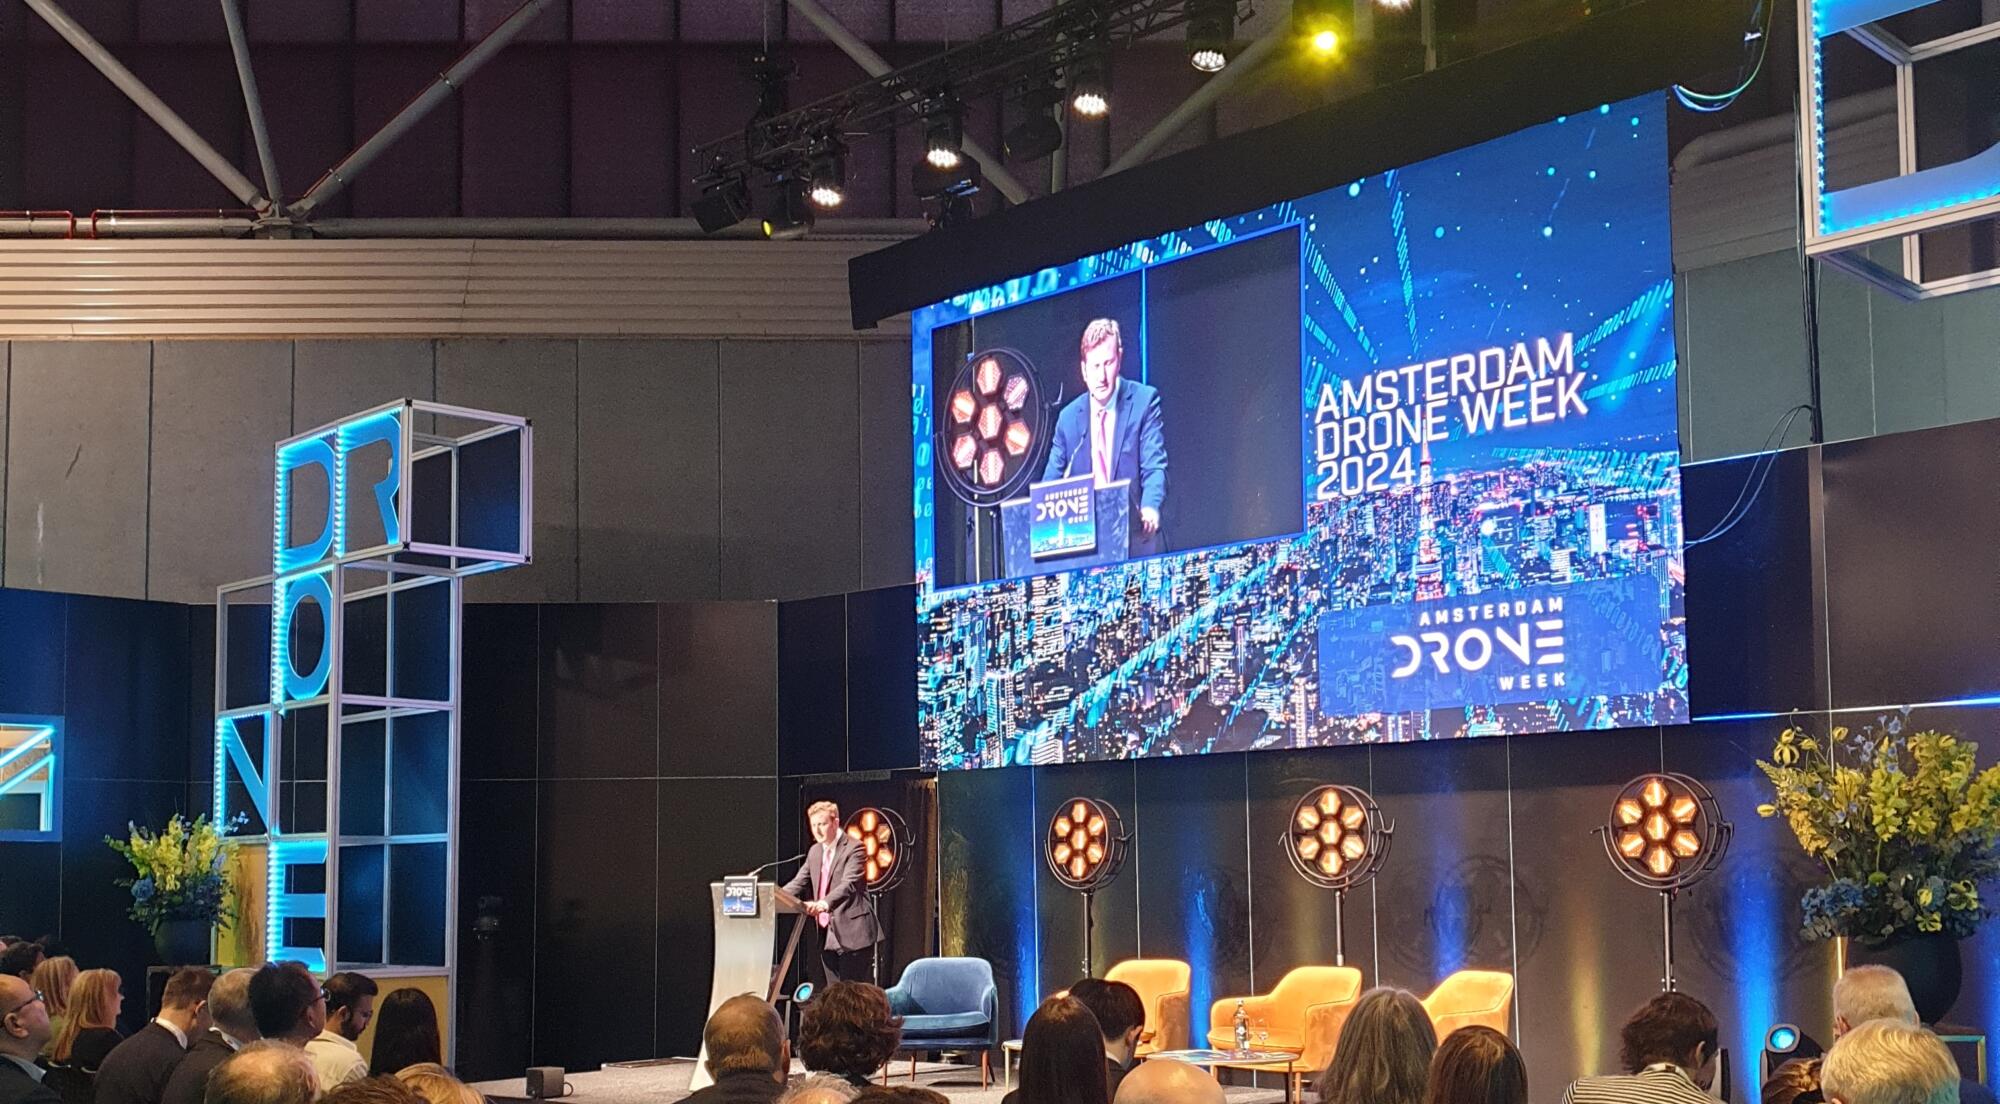 Cities and regions take off at Amsterdam Drone Week 2024